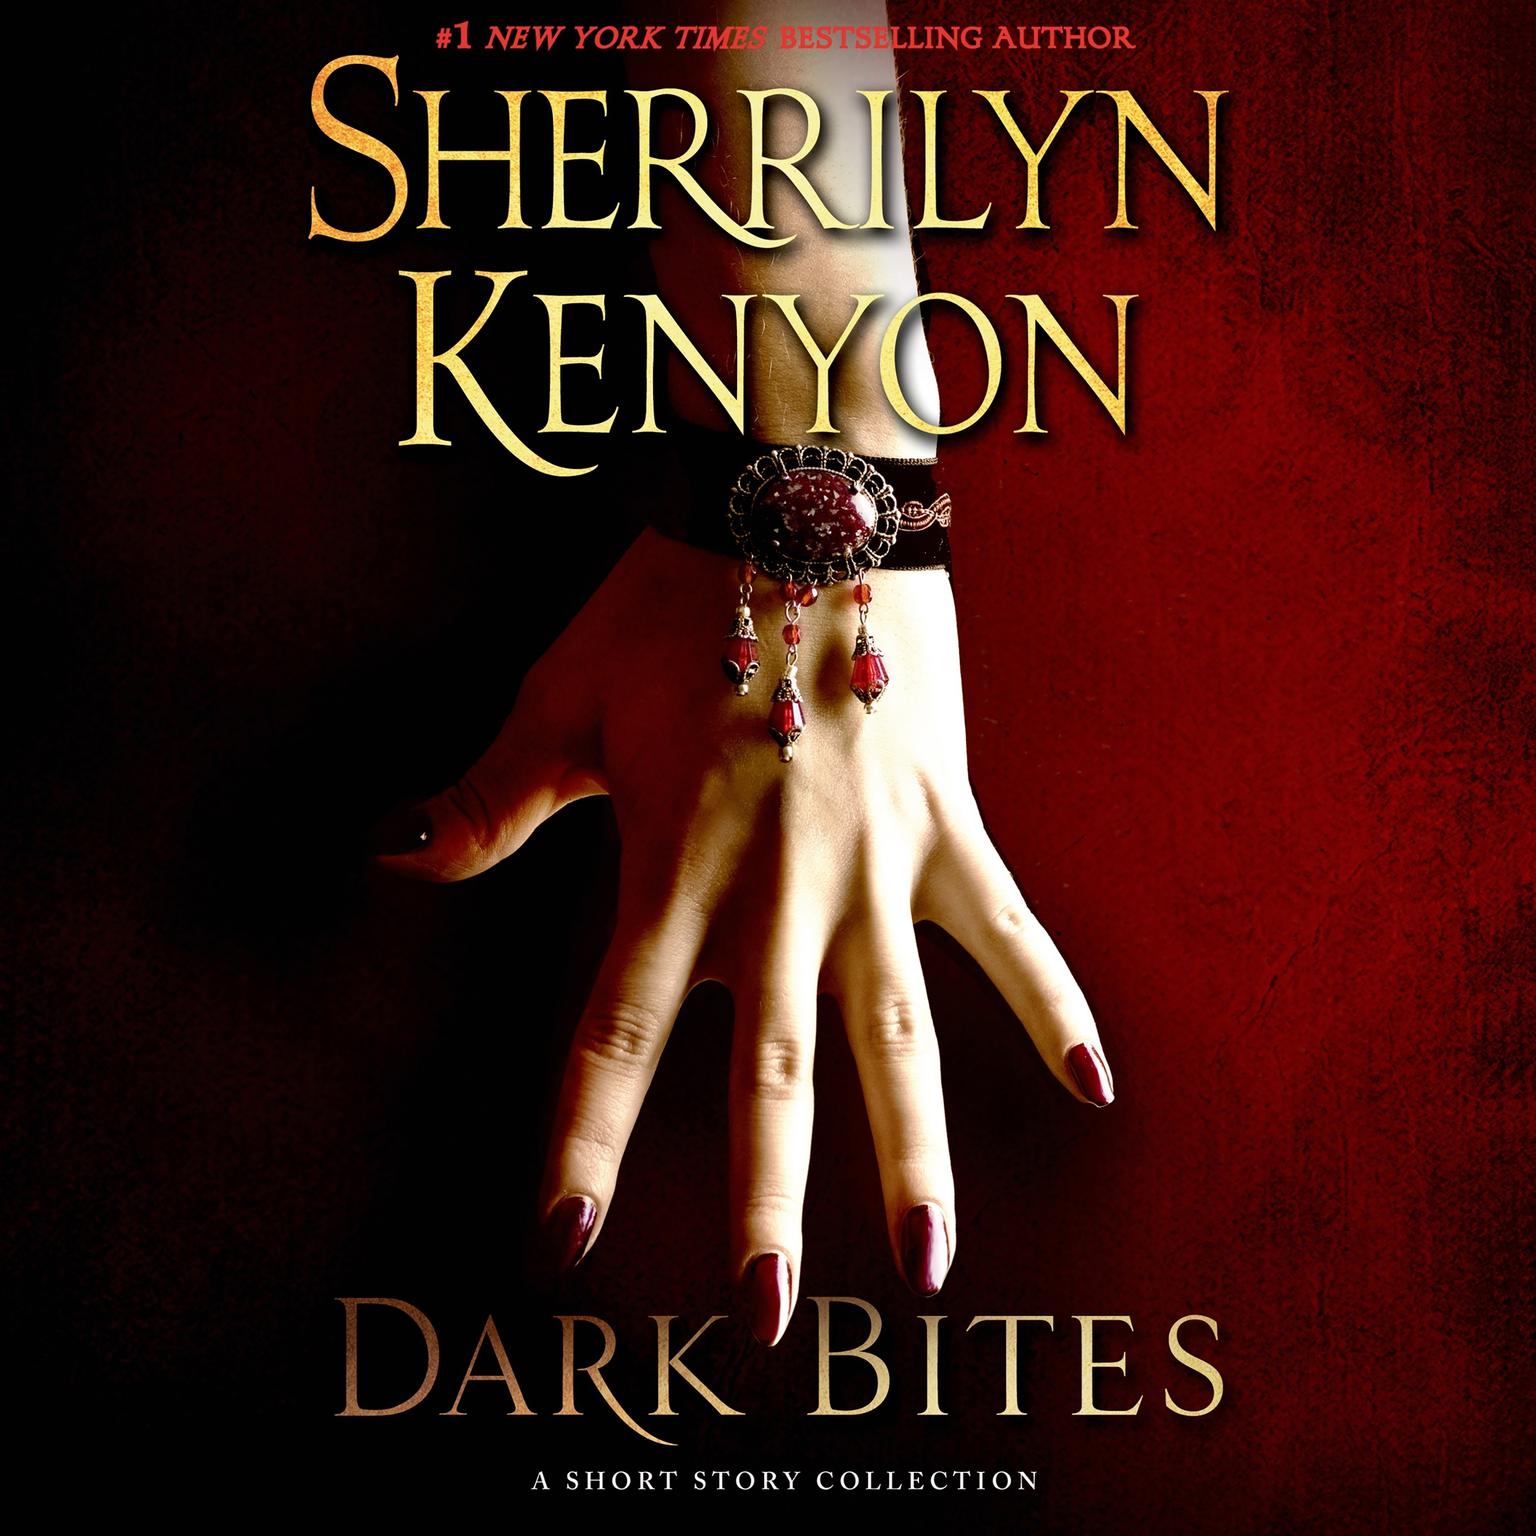 Dark Bites: A Short Story Collection Audiobook, by Sherrilyn Kenyon